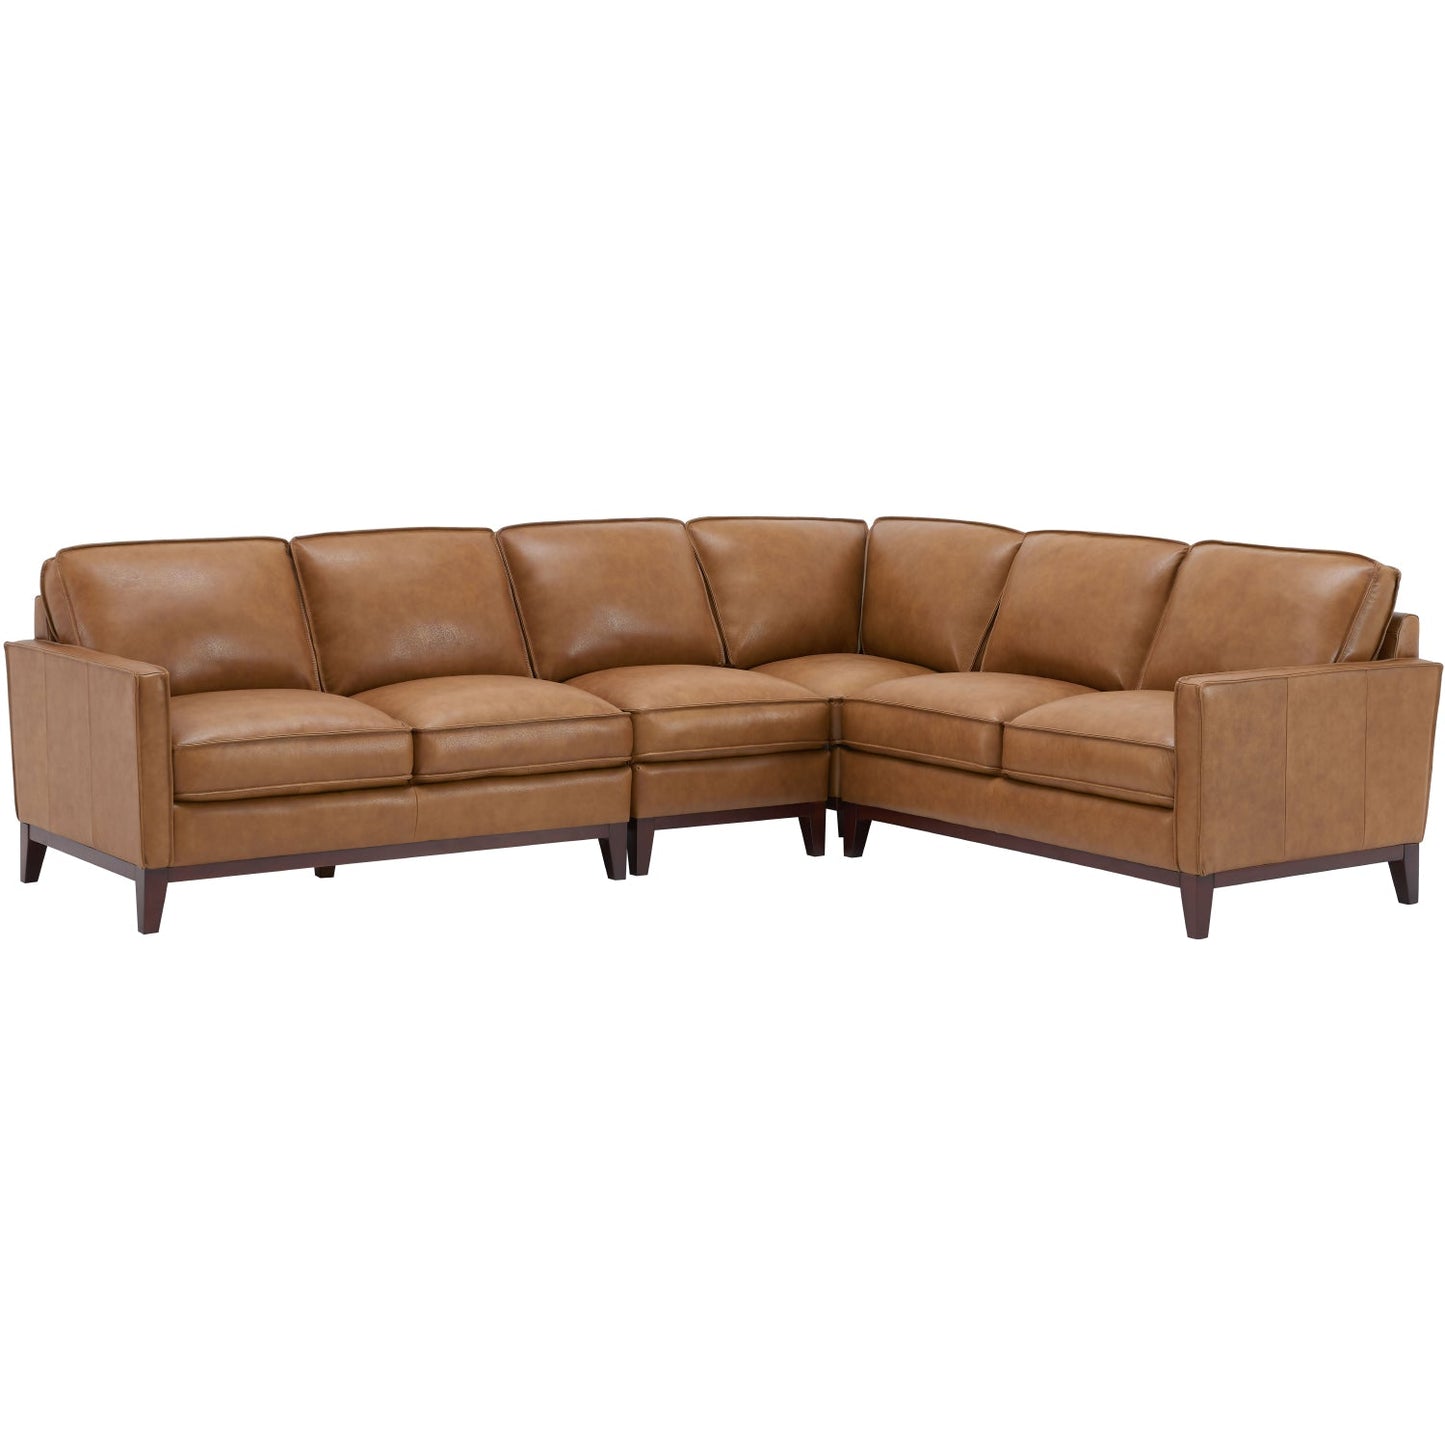 Port Sectional, Sofa, and Chair